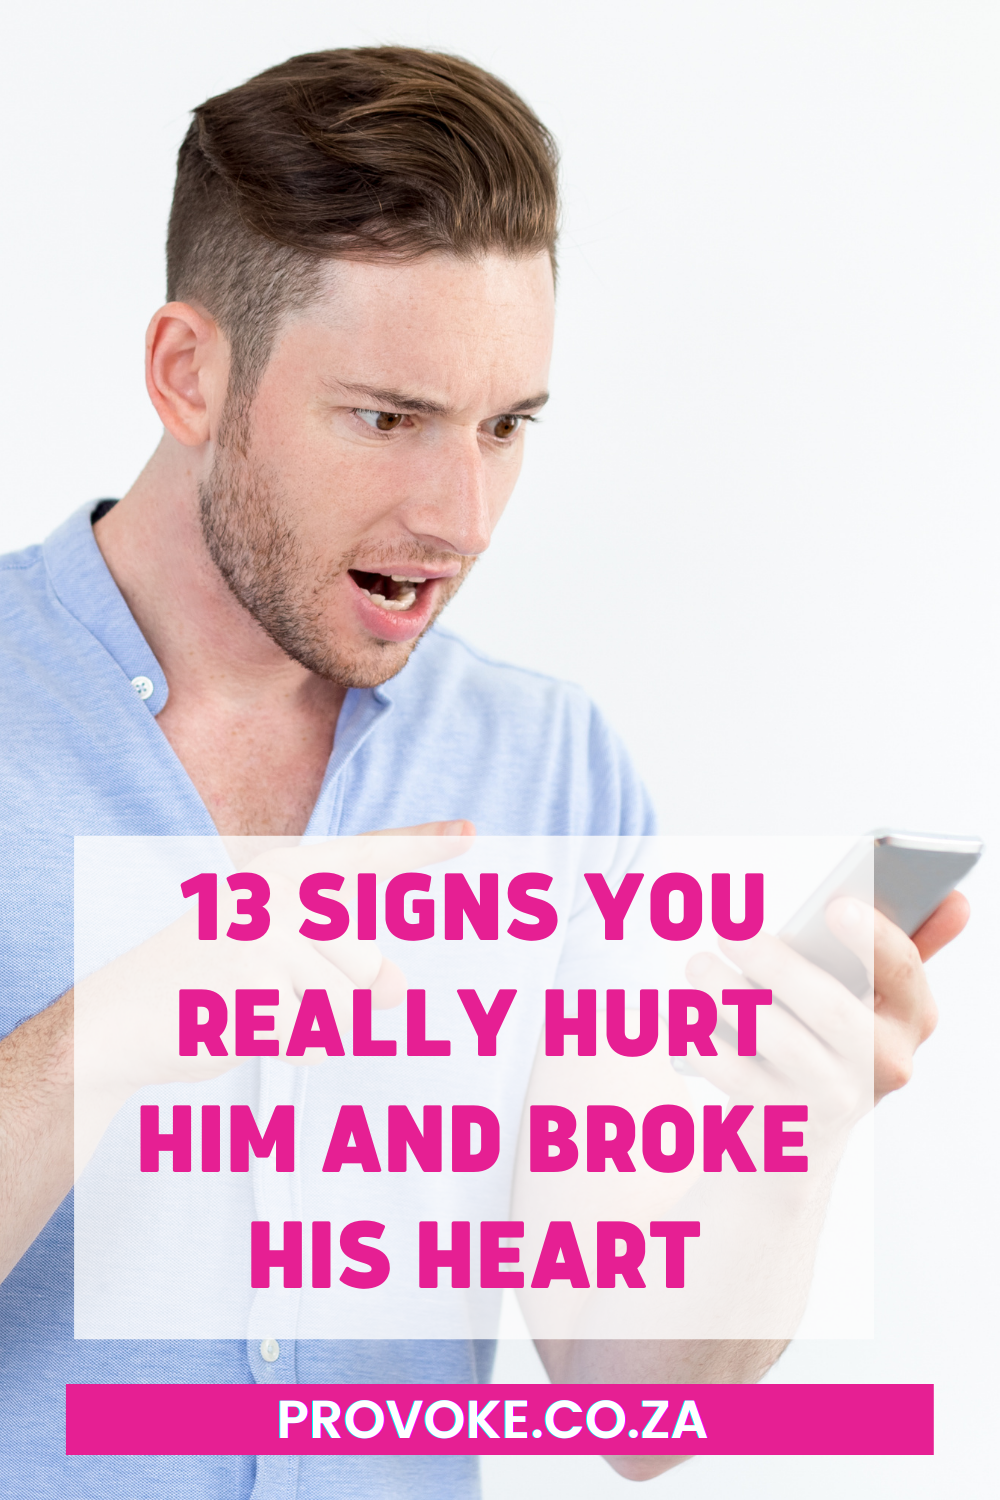 Signs you really hurt him